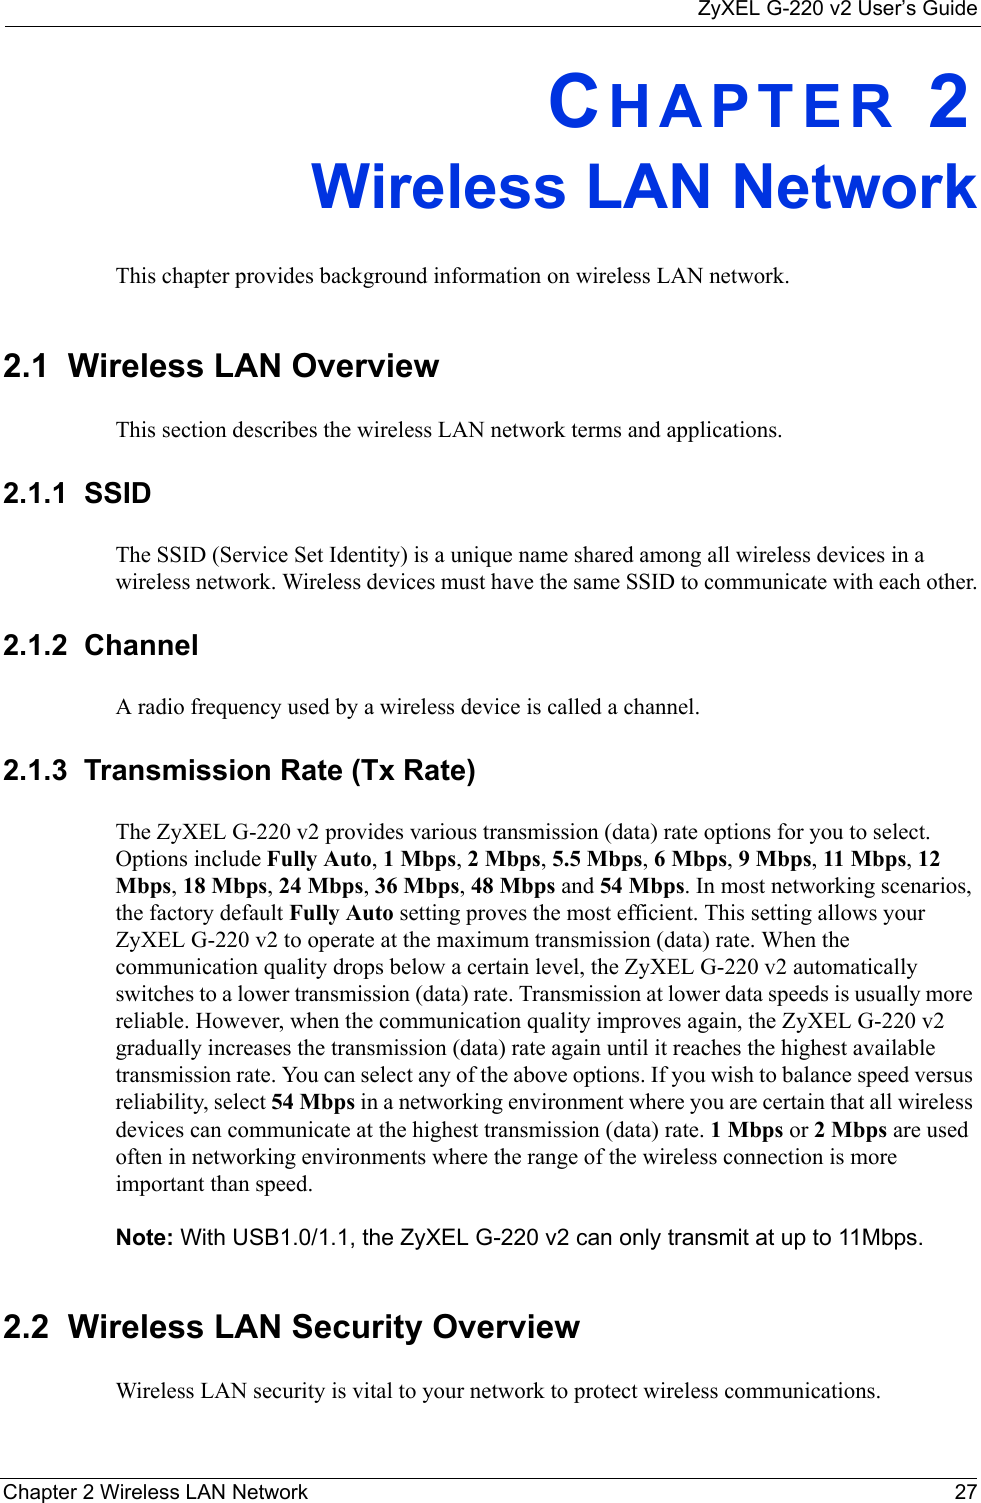 ZyXEL G-220 v2 User’s GuideChapter 2 Wireless LAN Network 27CHAPTER 2Wireless LAN NetworkThis chapter provides background information on wireless LAN network.2.1  Wireless LAN Overview This section describes the wireless LAN network terms and applications.2.1.1  SSIDThe SSID (Service Set Identity) is a unique name shared among all wireless devices in a wireless network. Wireless devices must have the same SSID to communicate with each other.2.1.2  ChannelA radio frequency used by a wireless device is called a channel.2.1.3  Transmission Rate (Tx Rate)The ZyXEL G-220 v2 provides various transmission (data) rate options for you to select. Options include Fully Auto, 1 Mbps, 2 Mbps, 5.5 Mbps, 6 Mbps, 9 Mbps, 11 Mbps, 12 Mbps, 18 Mbps, 24 Mbps, 36 Mbps, 48 Mbps and 54 Mbps. In most networking scenarios, the factory default Fully Auto setting proves the most efficient. This setting allows your ZyXEL G-220 v2 to operate at the maximum transmission (data) rate. When the communication quality drops below a certain level, the ZyXEL G-220 v2 automatically switches to a lower transmission (data) rate. Transmission at lower data speeds is usually more reliable. However, when the communication quality improves again, the ZyXEL G-220 v2 gradually increases the transmission (data) rate again until it reaches the highest available transmission rate. You can select any of the above options. If you wish to balance speed versus reliability, select 54 Mbps in a networking environment where you are certain that all wireless devices can communicate at the highest transmission (data) rate. 1 Mbps or 2 Mbps are used often in networking environments where the range of the wireless connection is more important than speed. Note: With USB1.0/1.1, the ZyXEL G-220 v2 can only transmit at up to 11Mbps.2.2  Wireless LAN Security Overview Wireless LAN security is vital to your network to protect wireless communications.